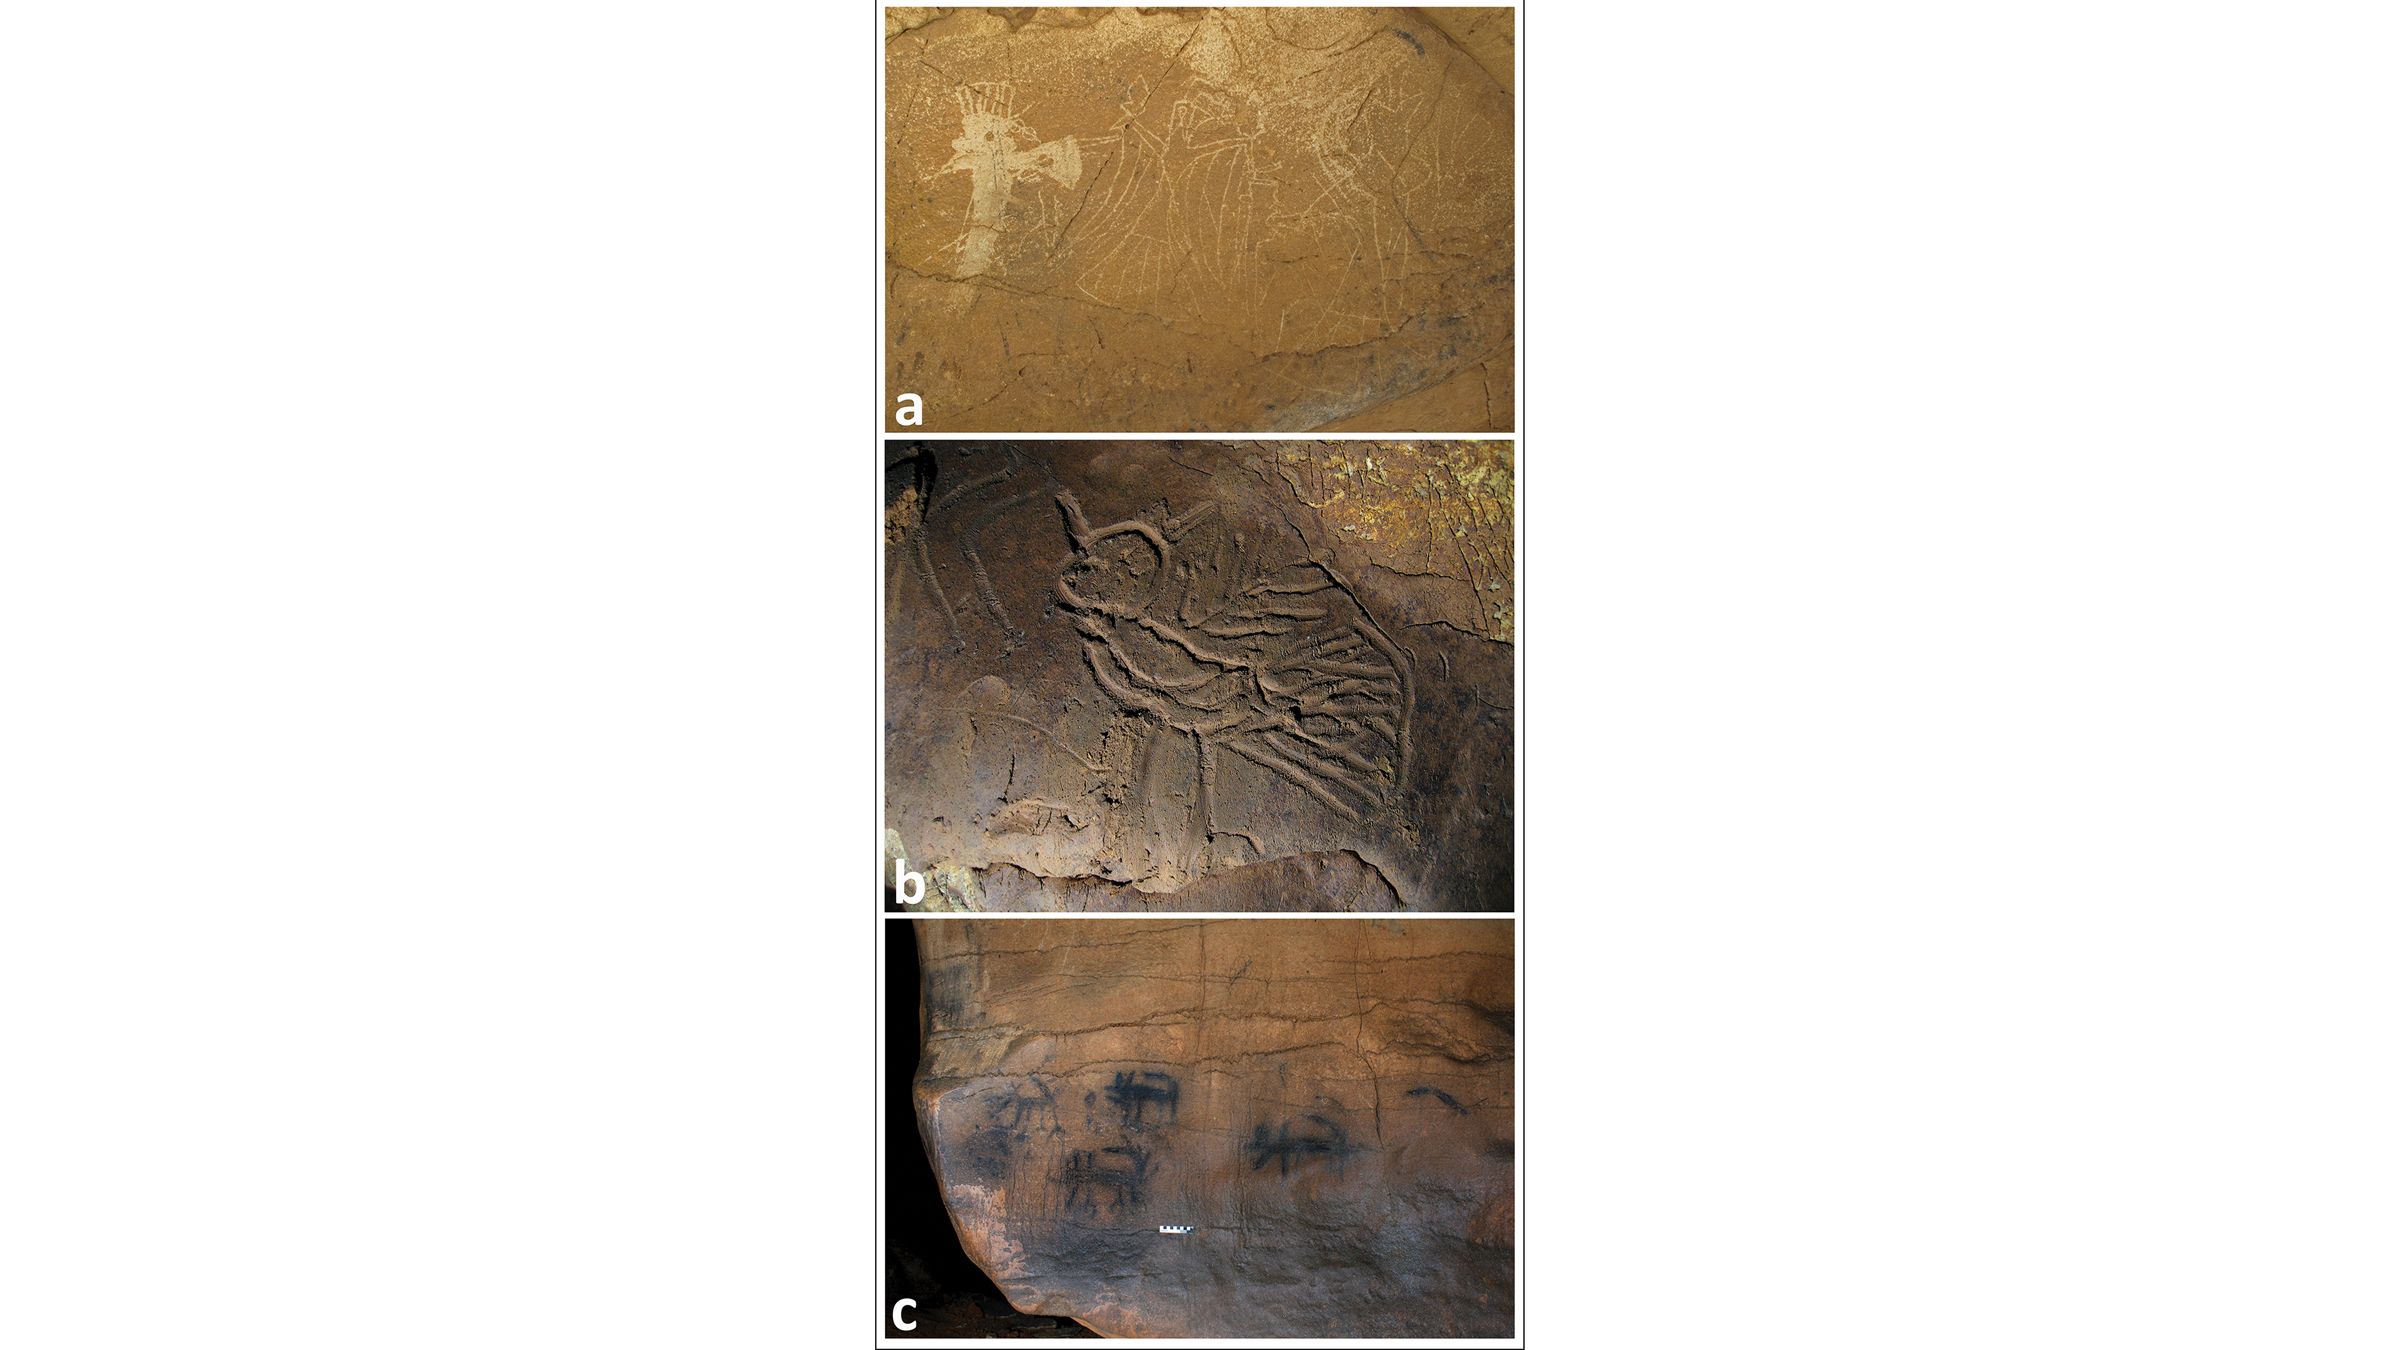 Photos of (A) petroglyphs of birds and weapons from the 11th unnamed cave, (B) a mud glyph owl from the mud glyph cave, and (C) canine pictographs from the 48th unnamed cave in Tennessee.